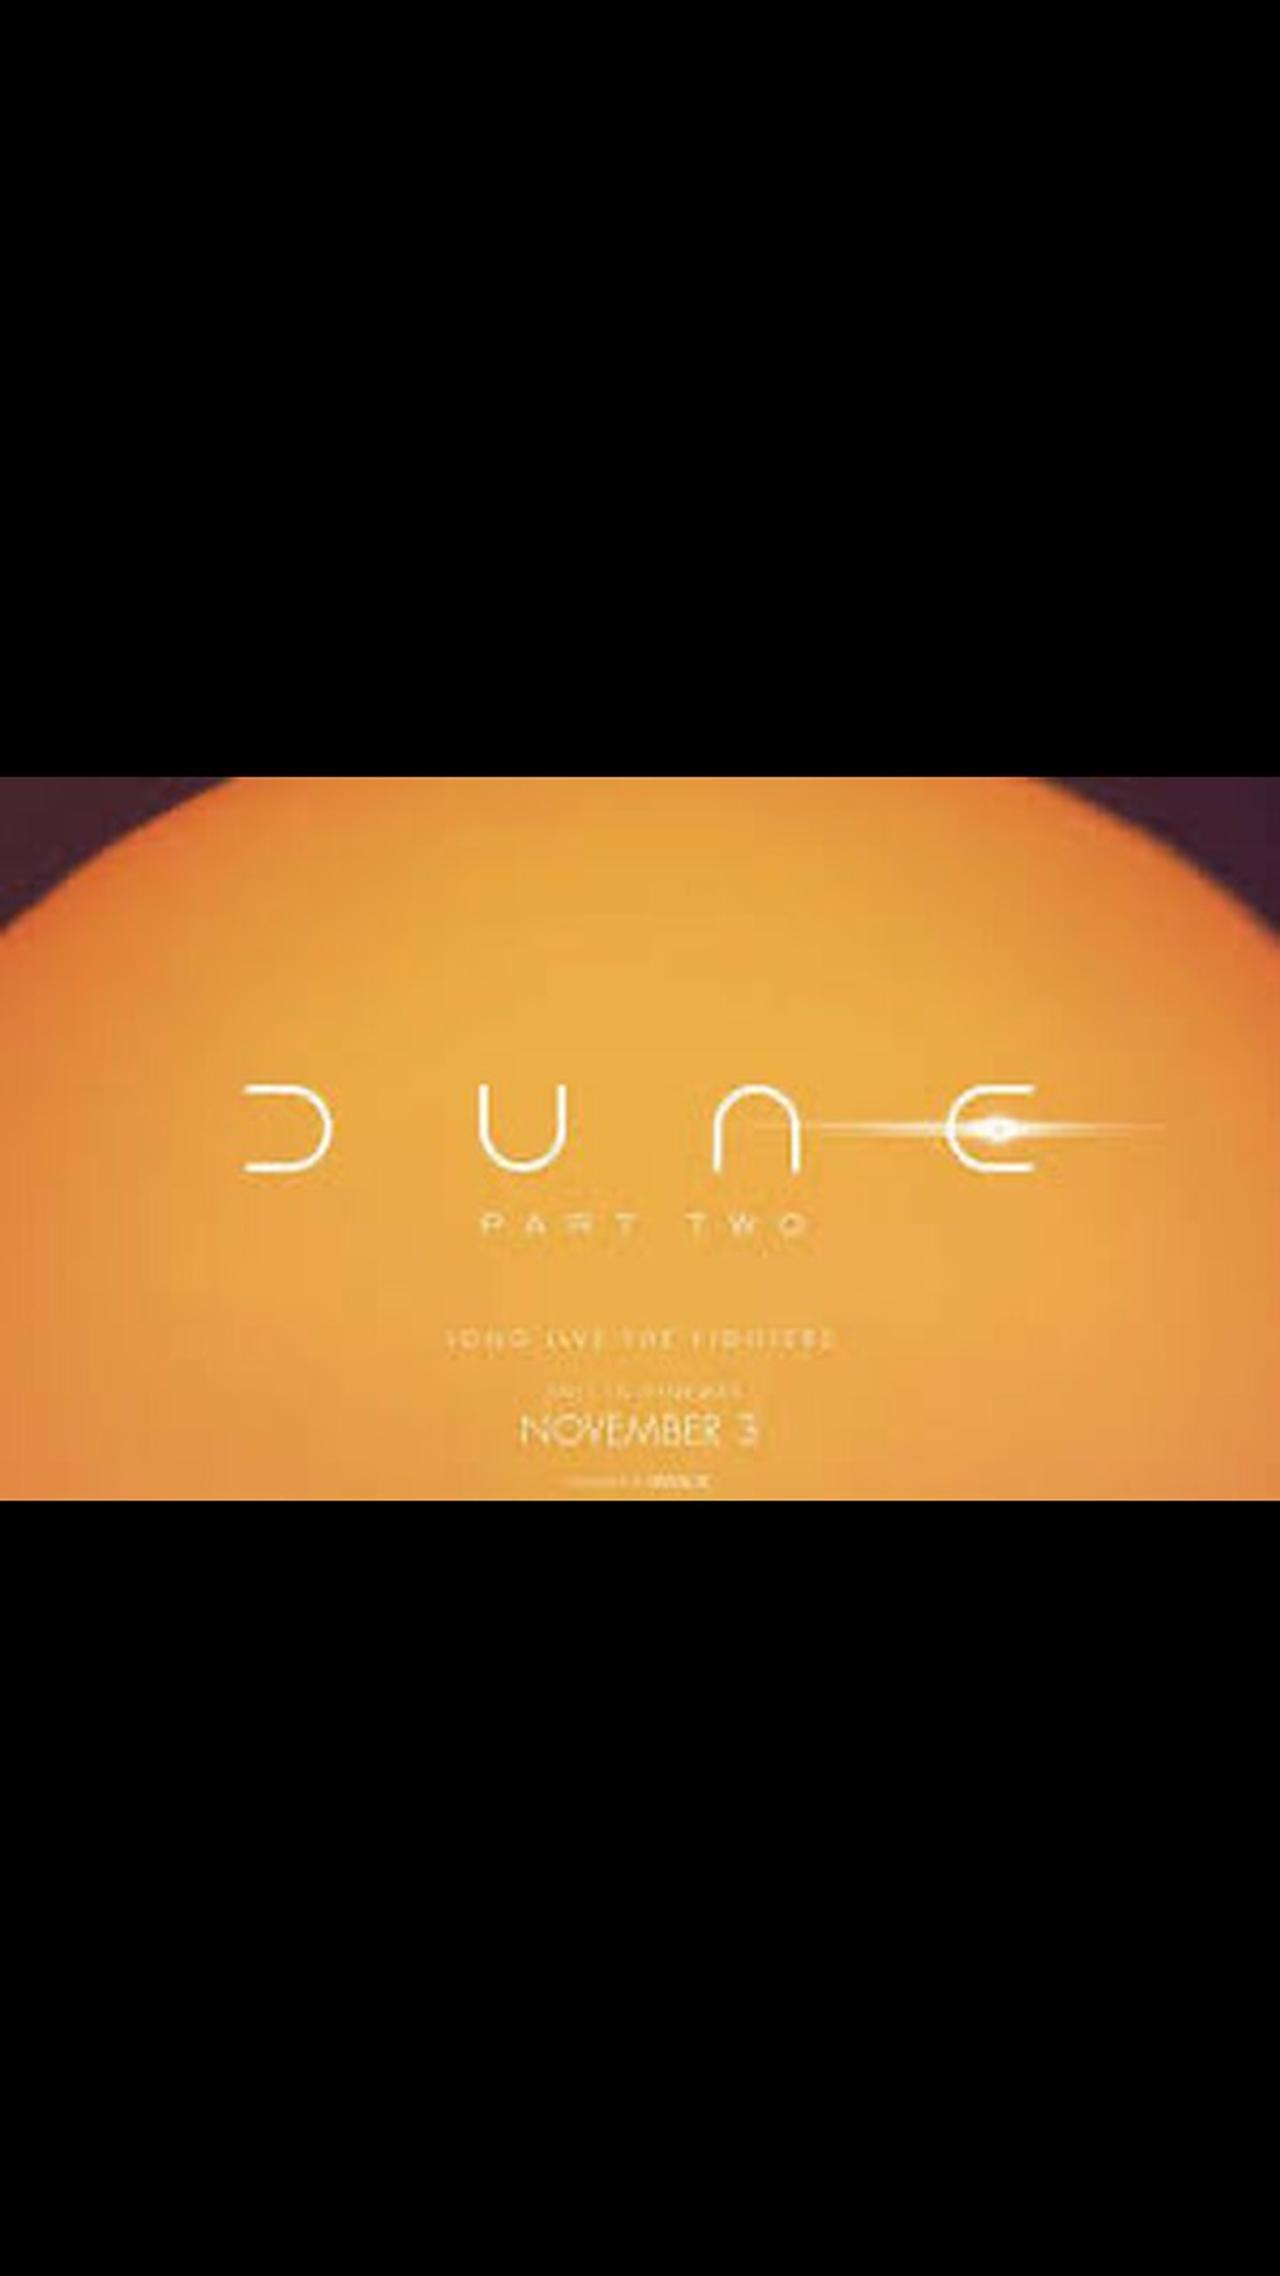 Dune part two official trailer (2023)